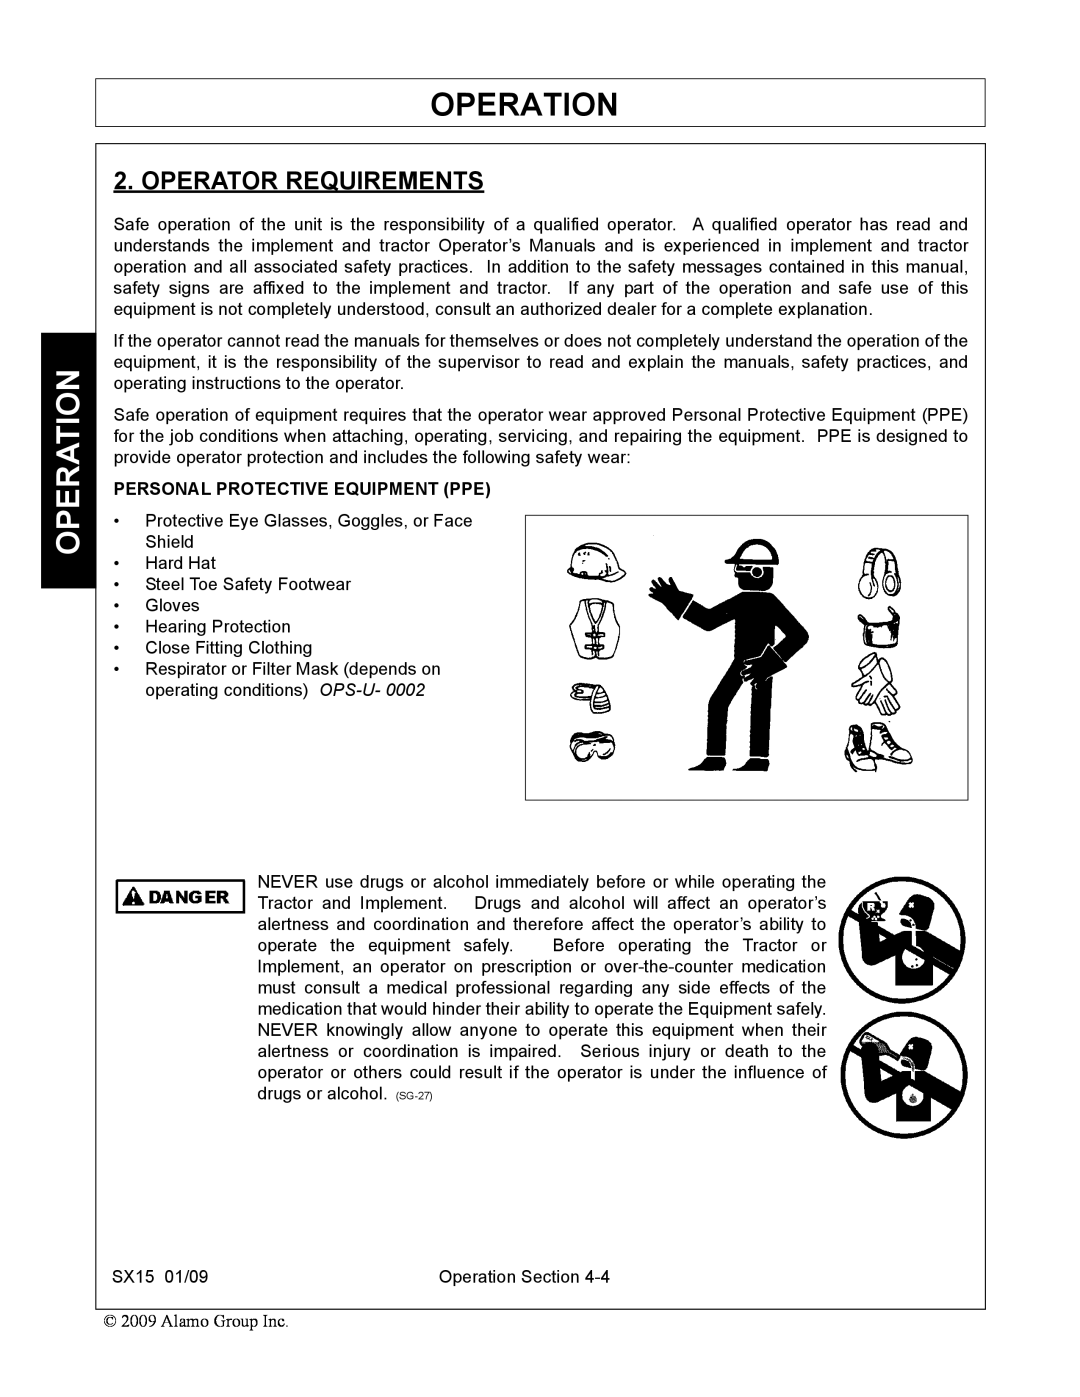 Alamo SX15 manual Operator Requirements, Operation, Personal Protective Equipment Ppe 